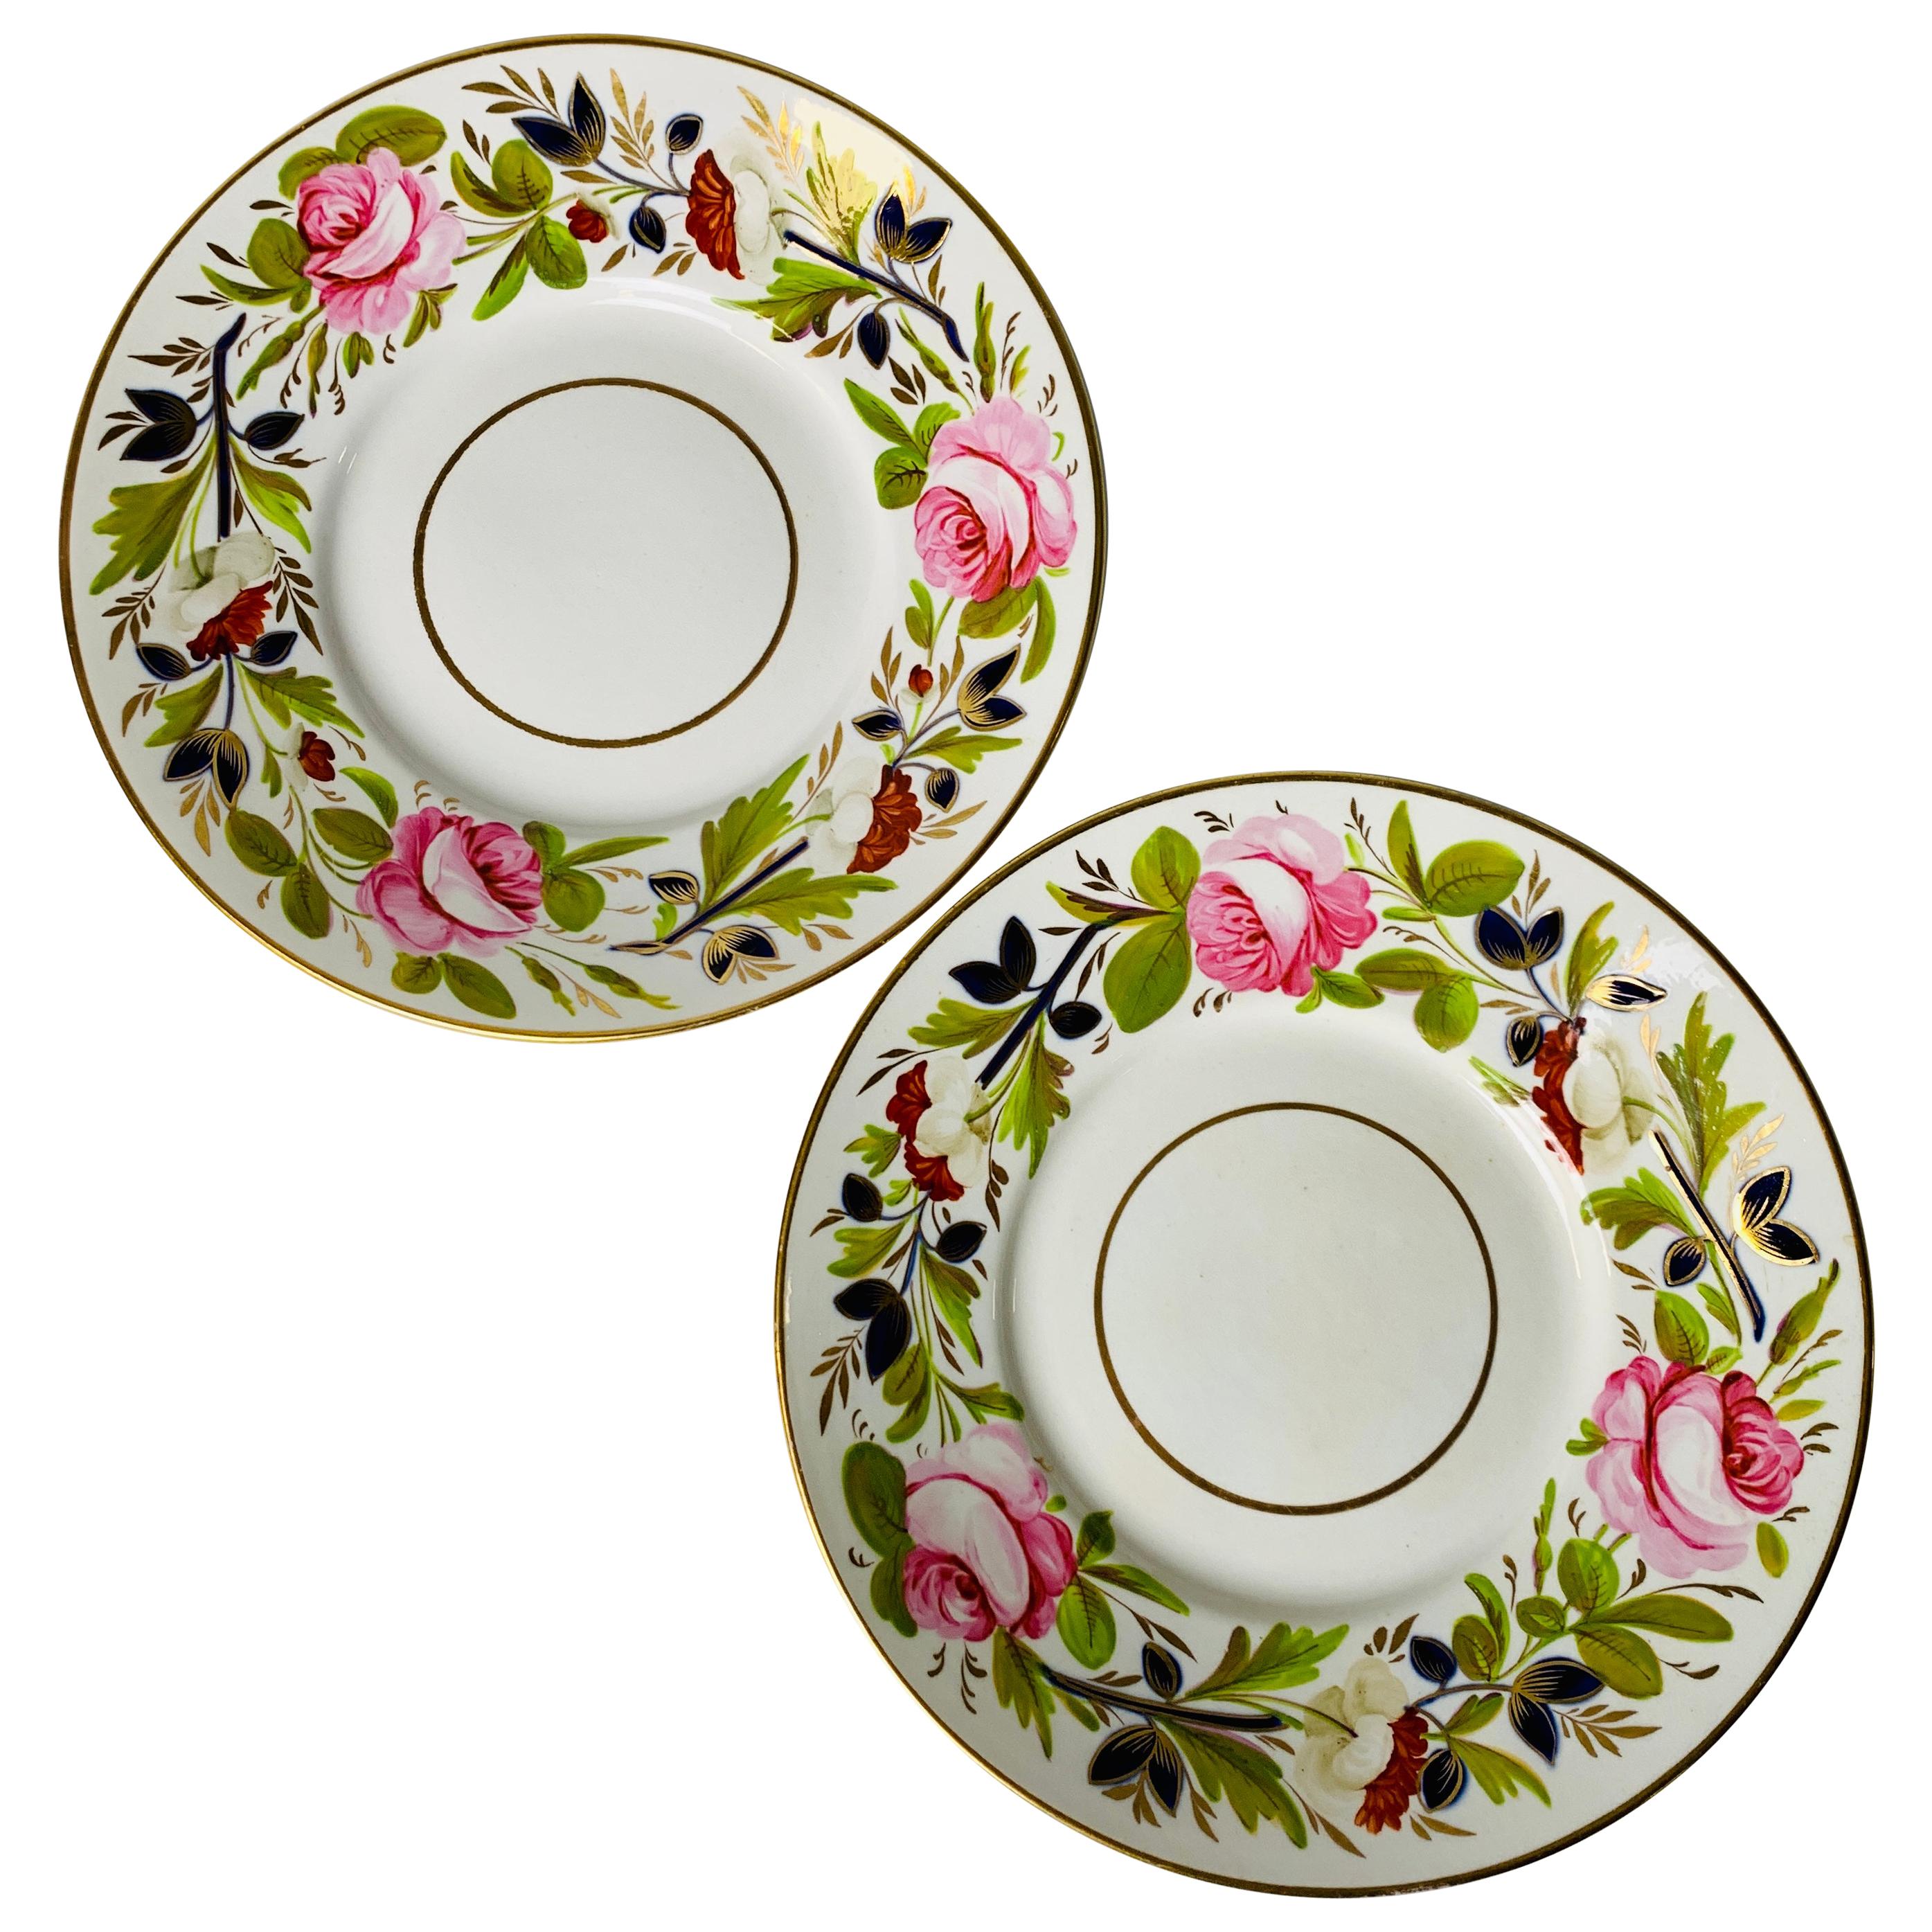 Pair Antique English Porcelain Dishes Hand Painted Roses England Circa 1830 For Sale